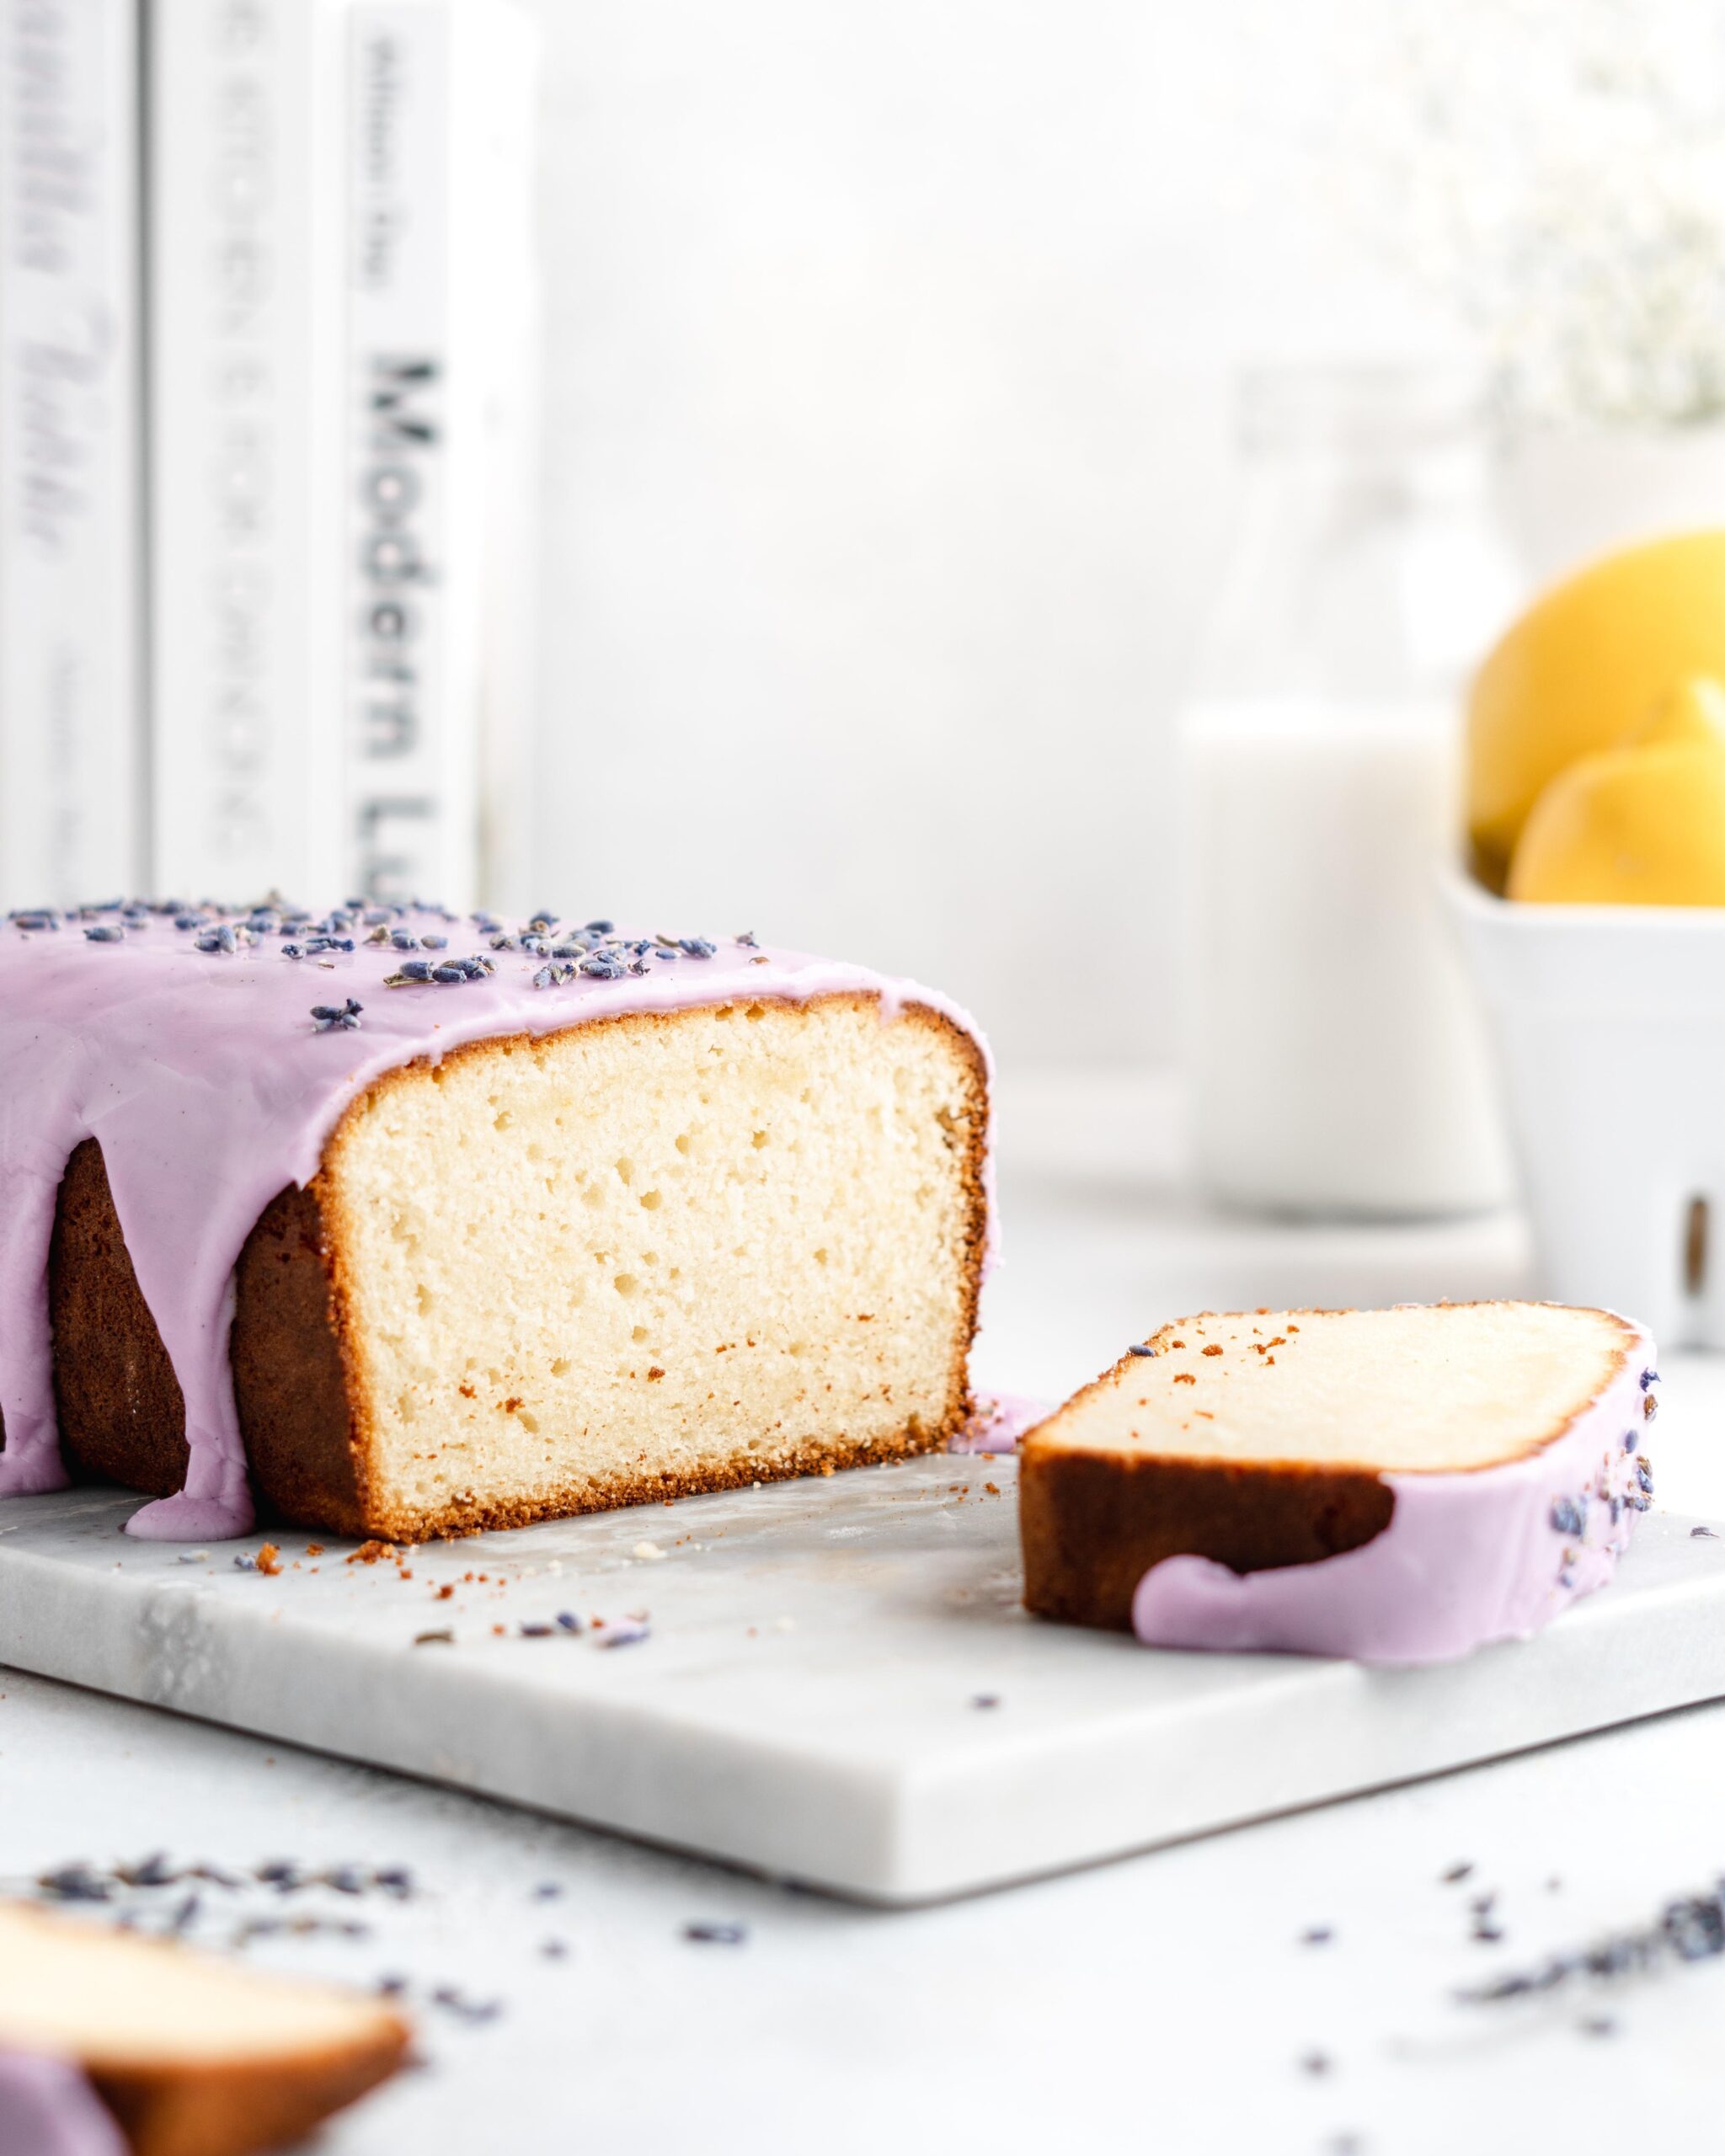  This pound cake is perfect for afternoon tea or coffee with friends